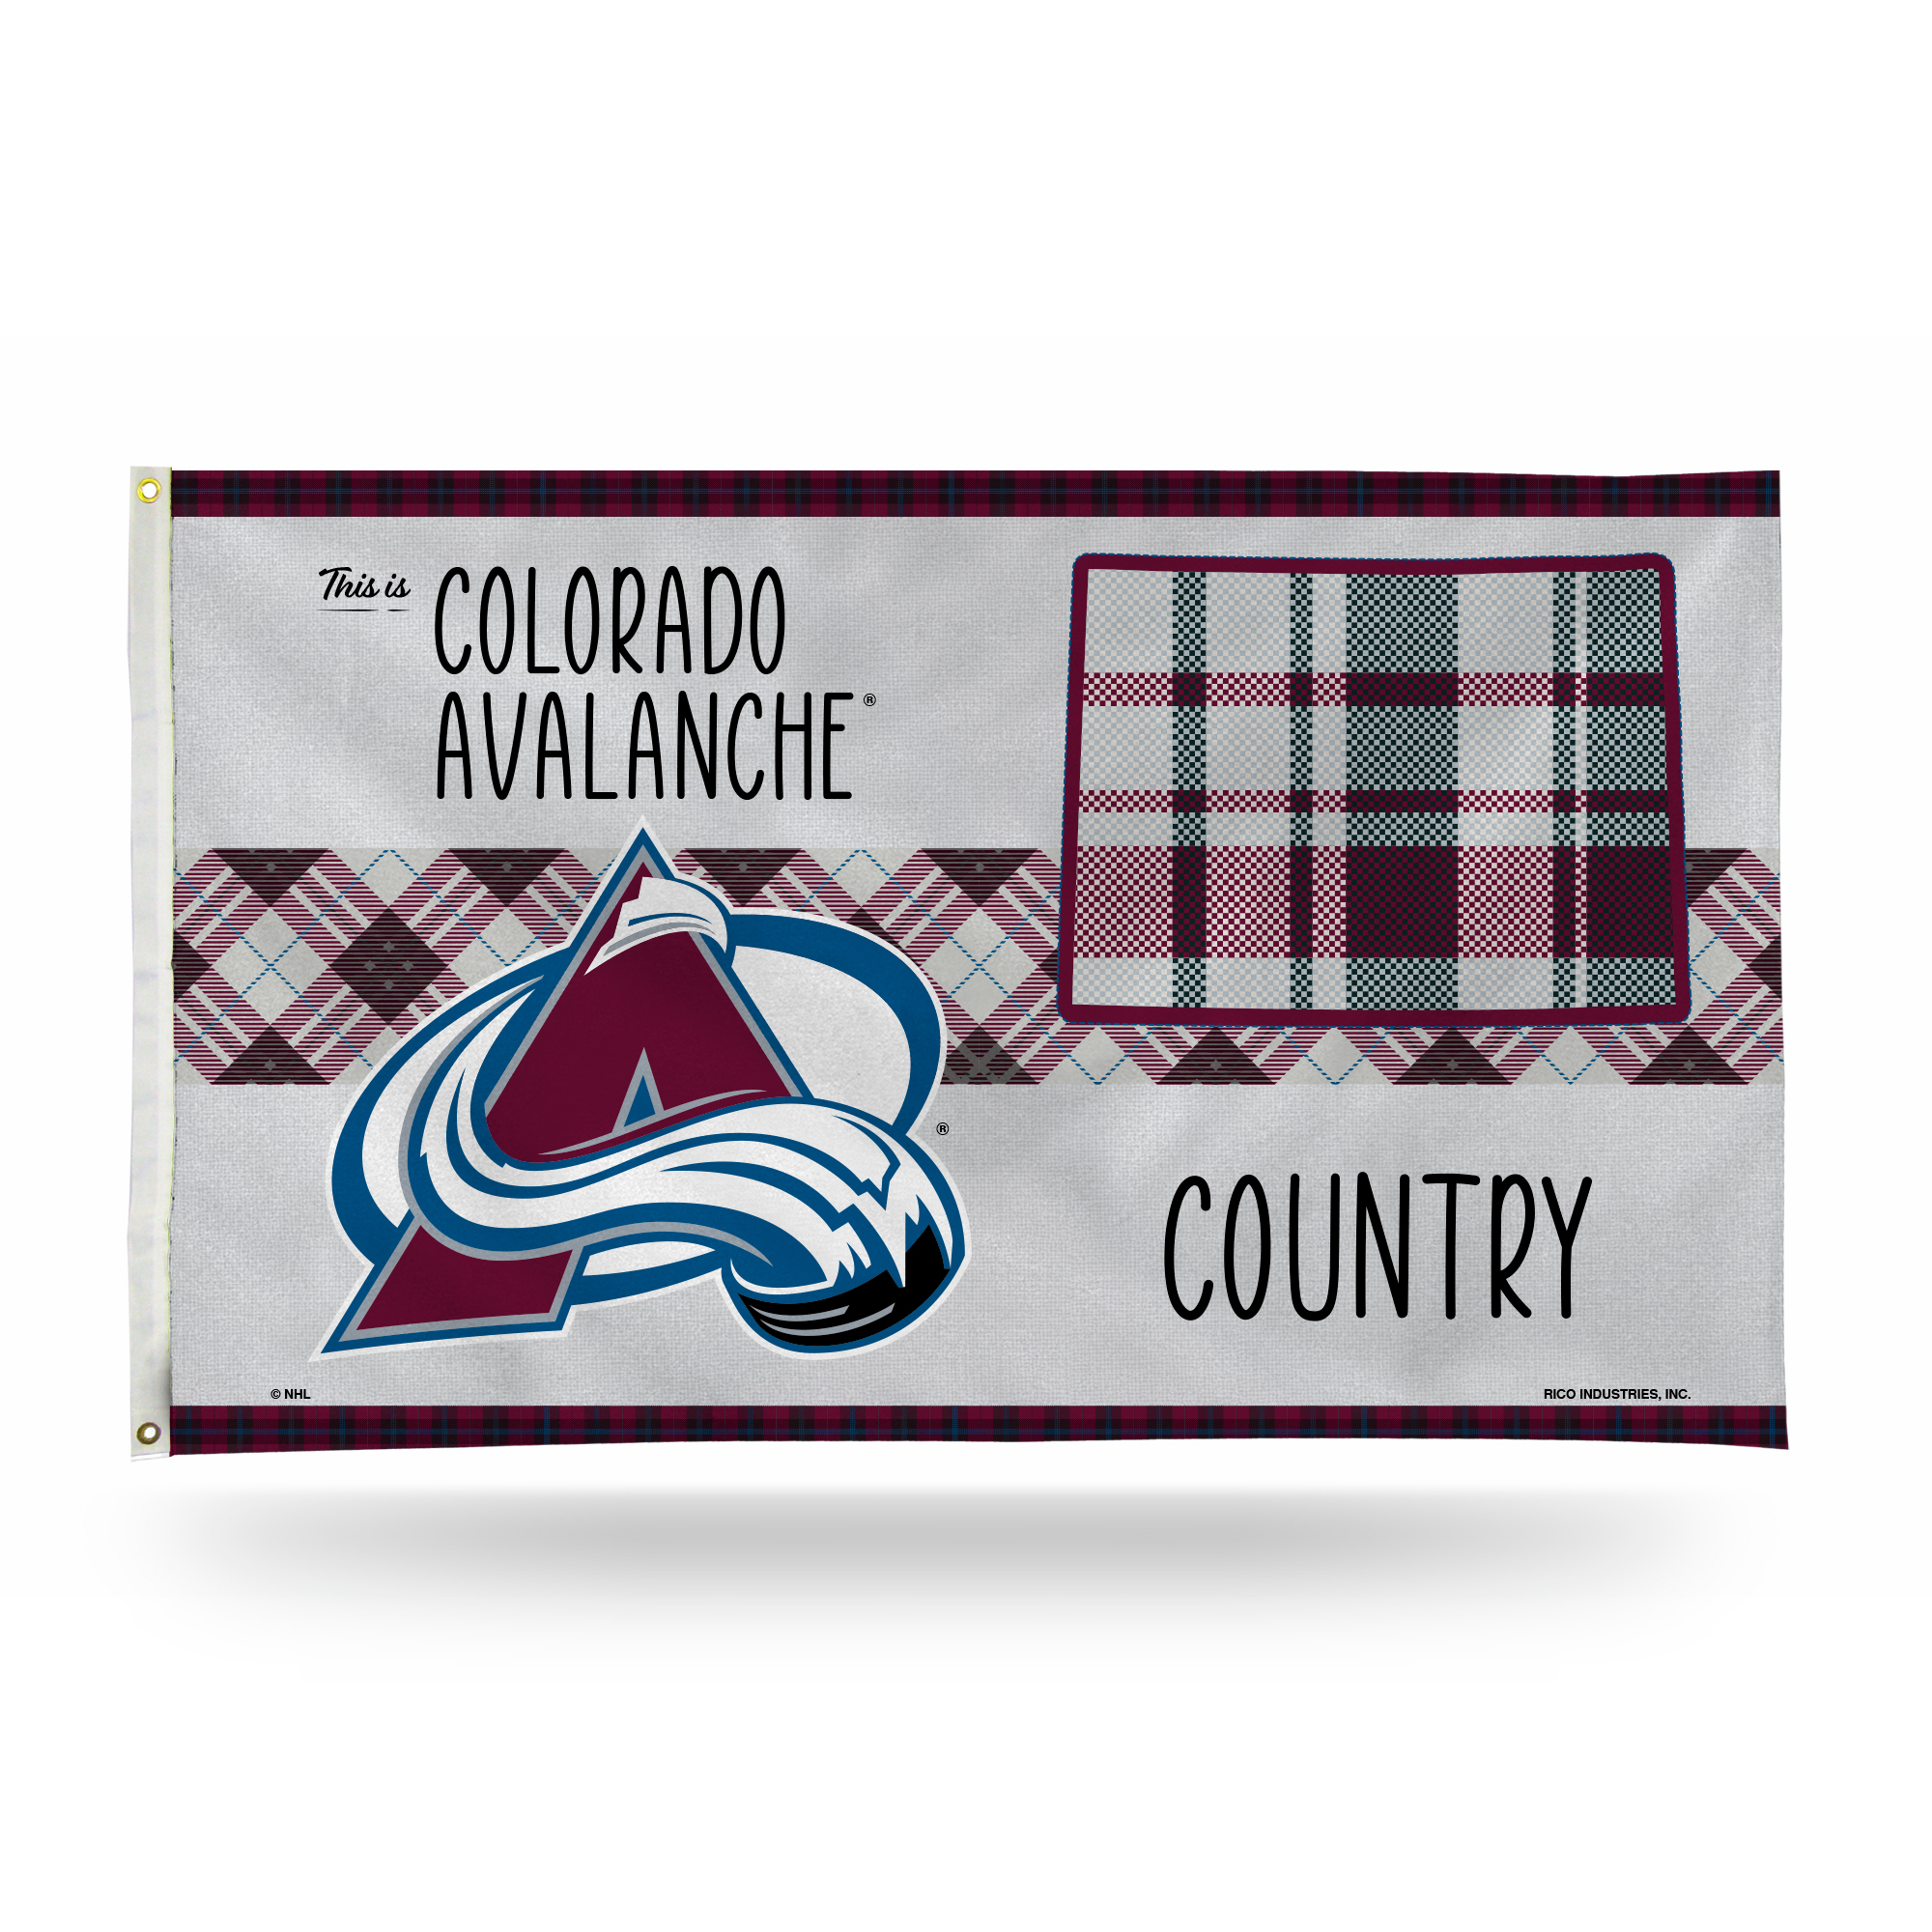 Rico NHL Rico Industries Colorado Avalanche This is Avalanche Country 3' x 5' Banner Flag